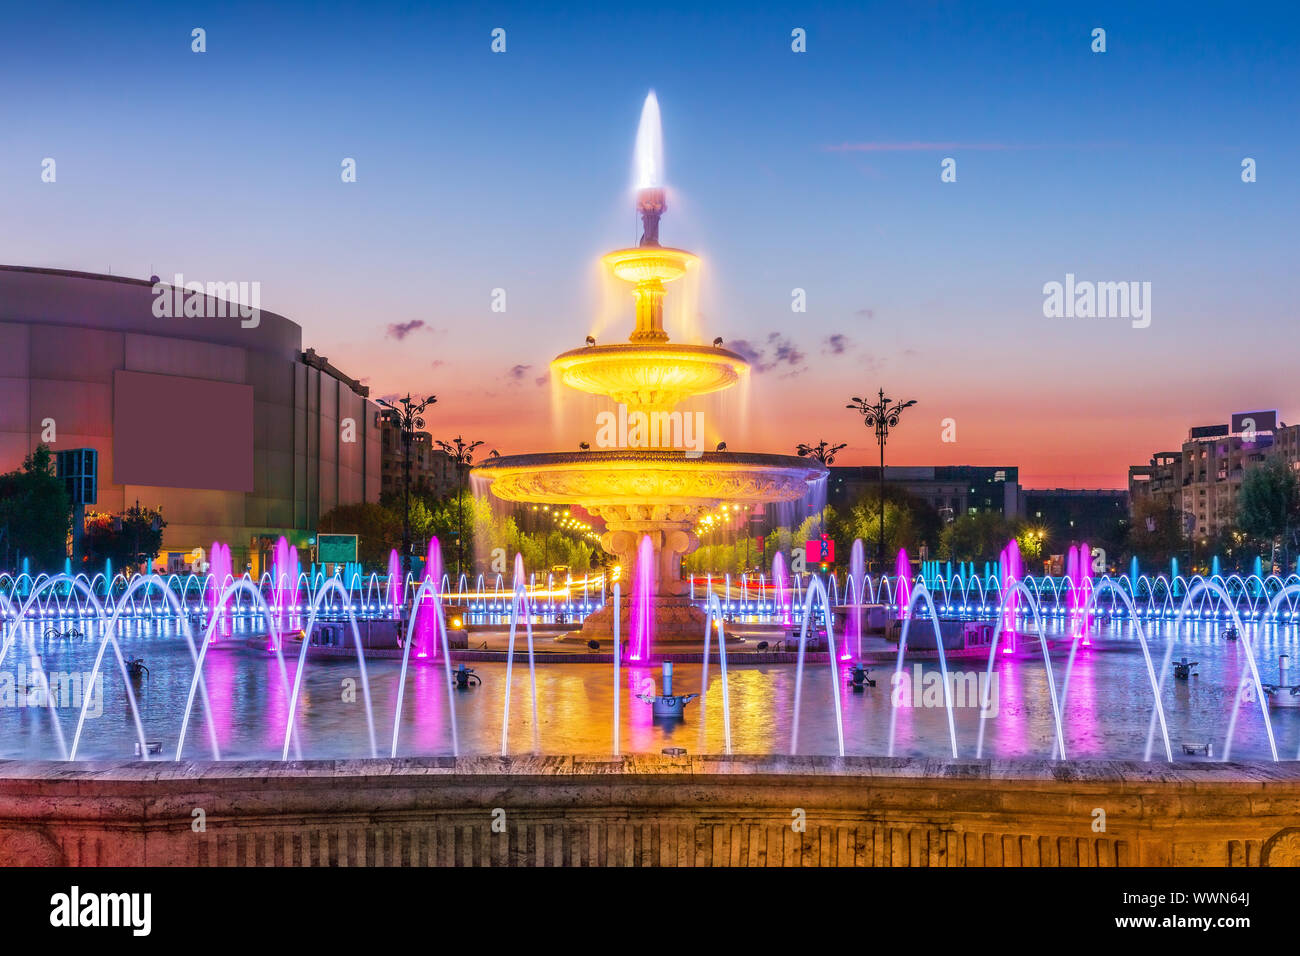 Bucharest, Romania. Water fountains at the Unirii Square. Stock Photo